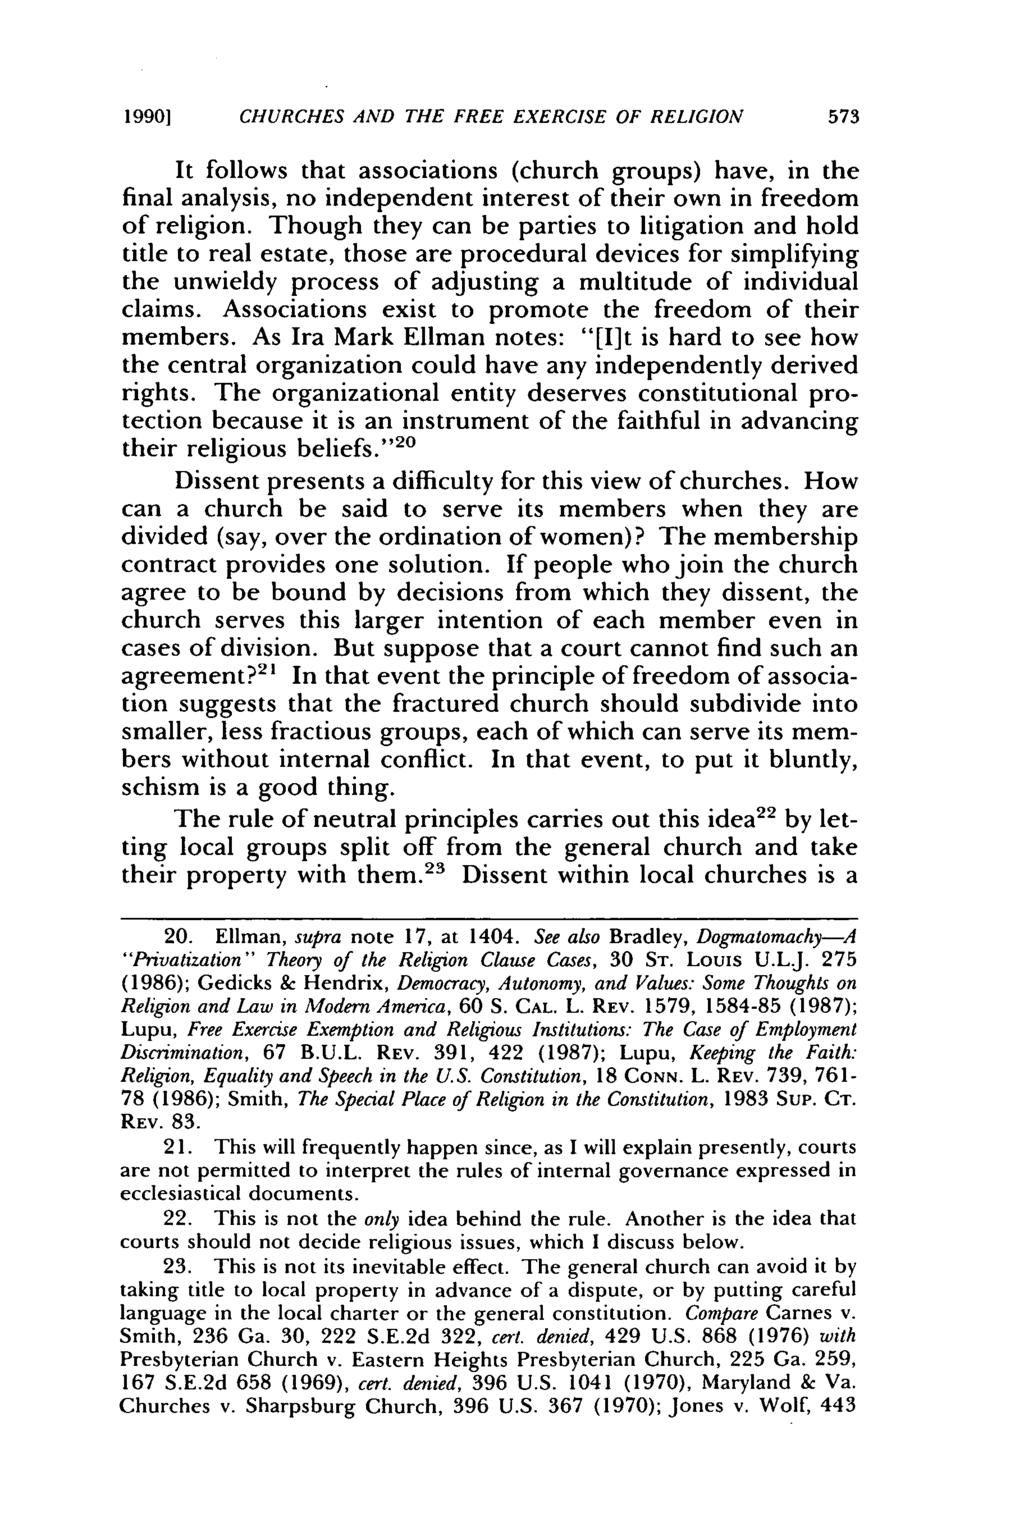 1990] CHURCHES AND THE FREE EXERCISE OF RELIGION It follows that associations (church groups) have, in the final analysis, no independent interest of their own in freedom of religion.